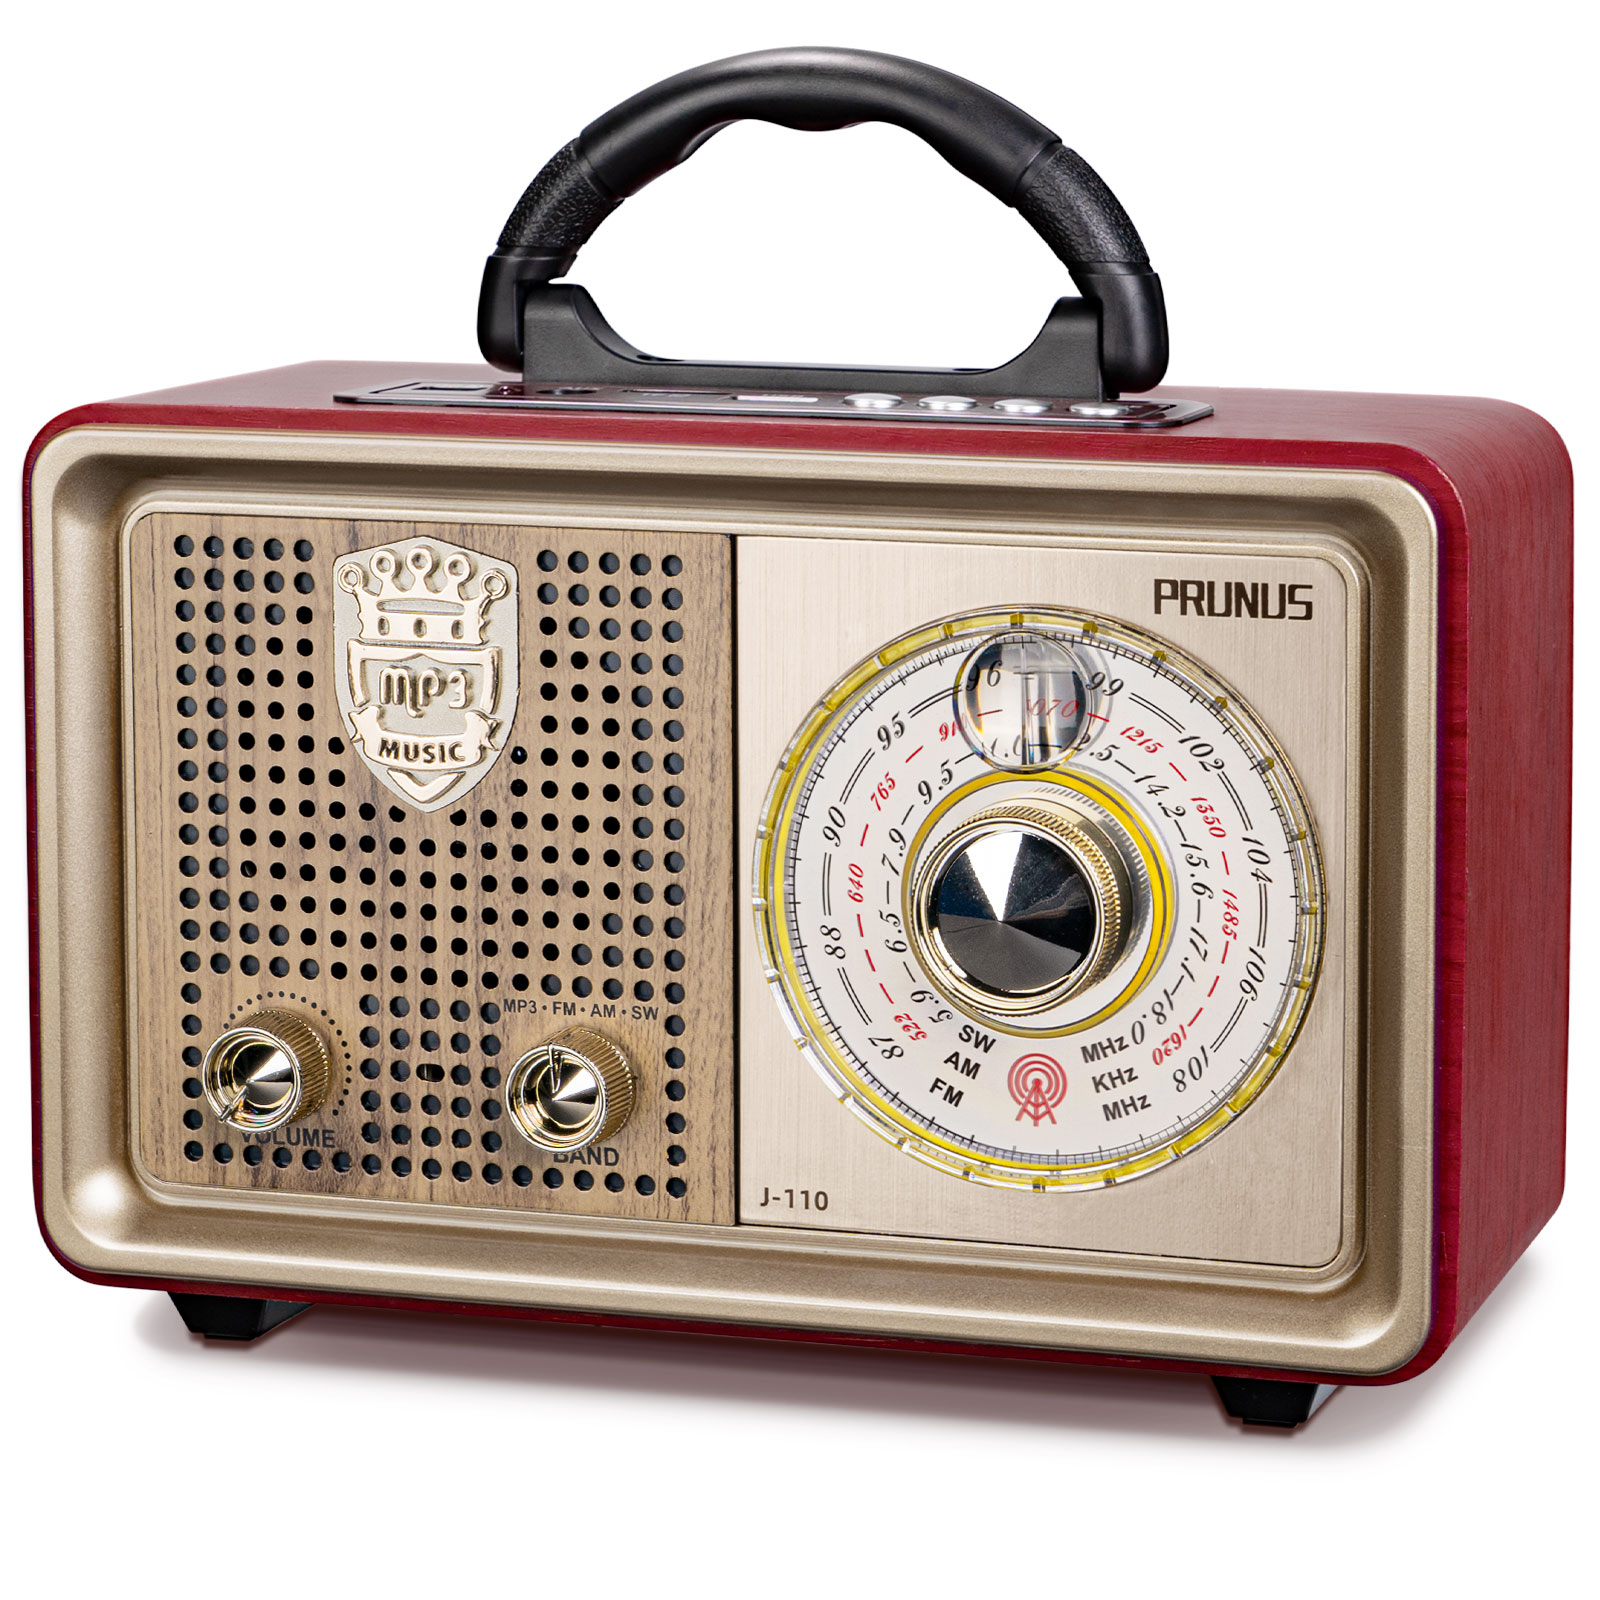 PRUNUS J-110 AM FM Shortwave Radio Portable Transistor Radio with Vintage  Style, Battery Powered Radio with 3-Way Power Sources, Enhanced Bass,  Bluetooth, AUX/TF Card/USB Disk MP3 Player